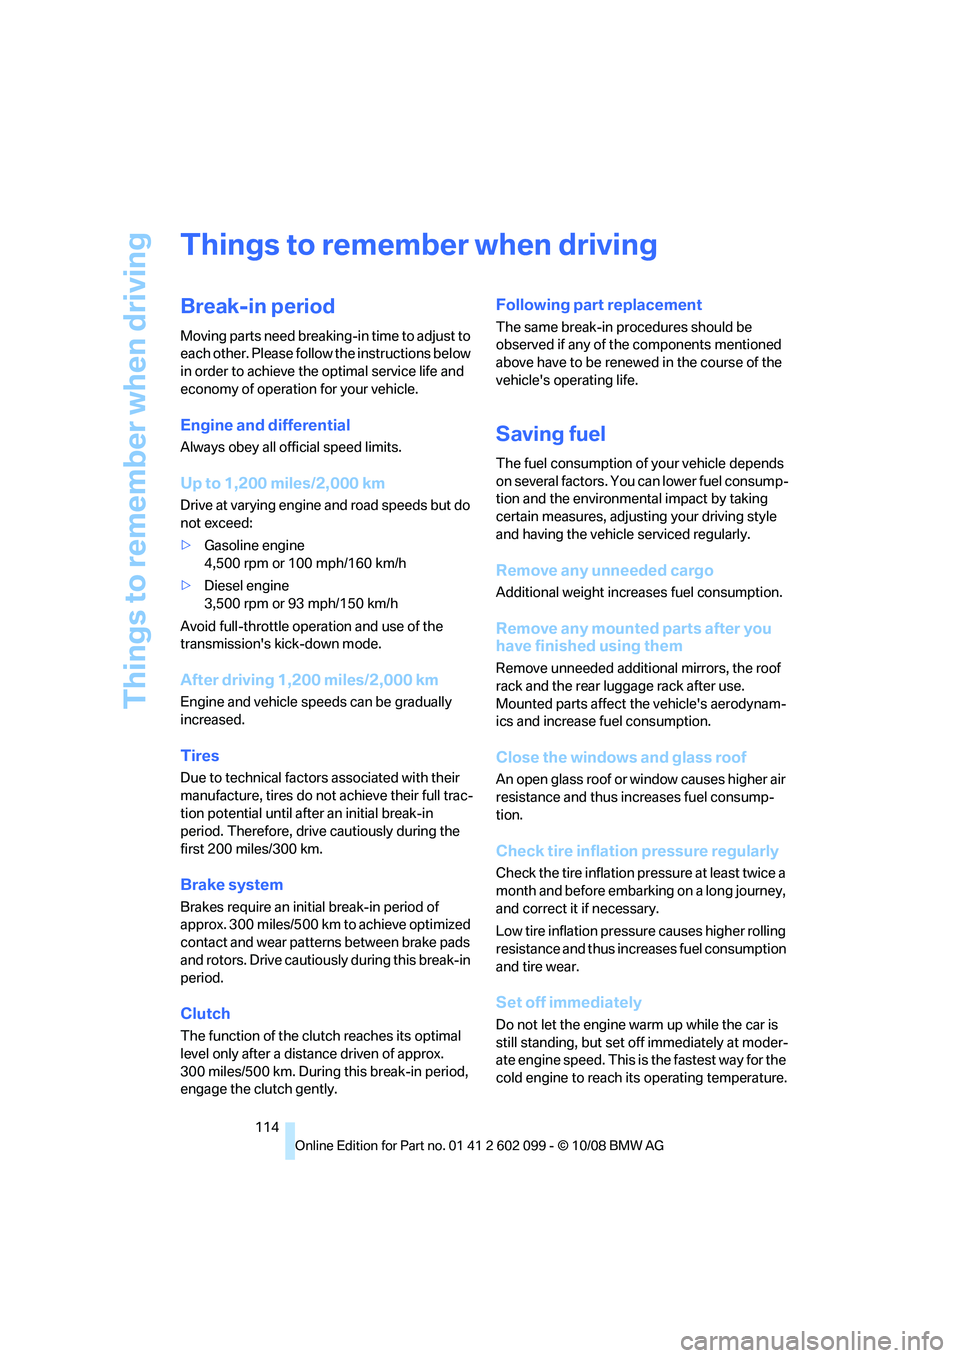 BMW 3 SERIES 2009  Owners Manual Things to remember when driving
114
Things to remember when driving
Break-in period
Moving parts need breaking-in time to adjust to 
each other. Please follow the instructions below 
in order to achie